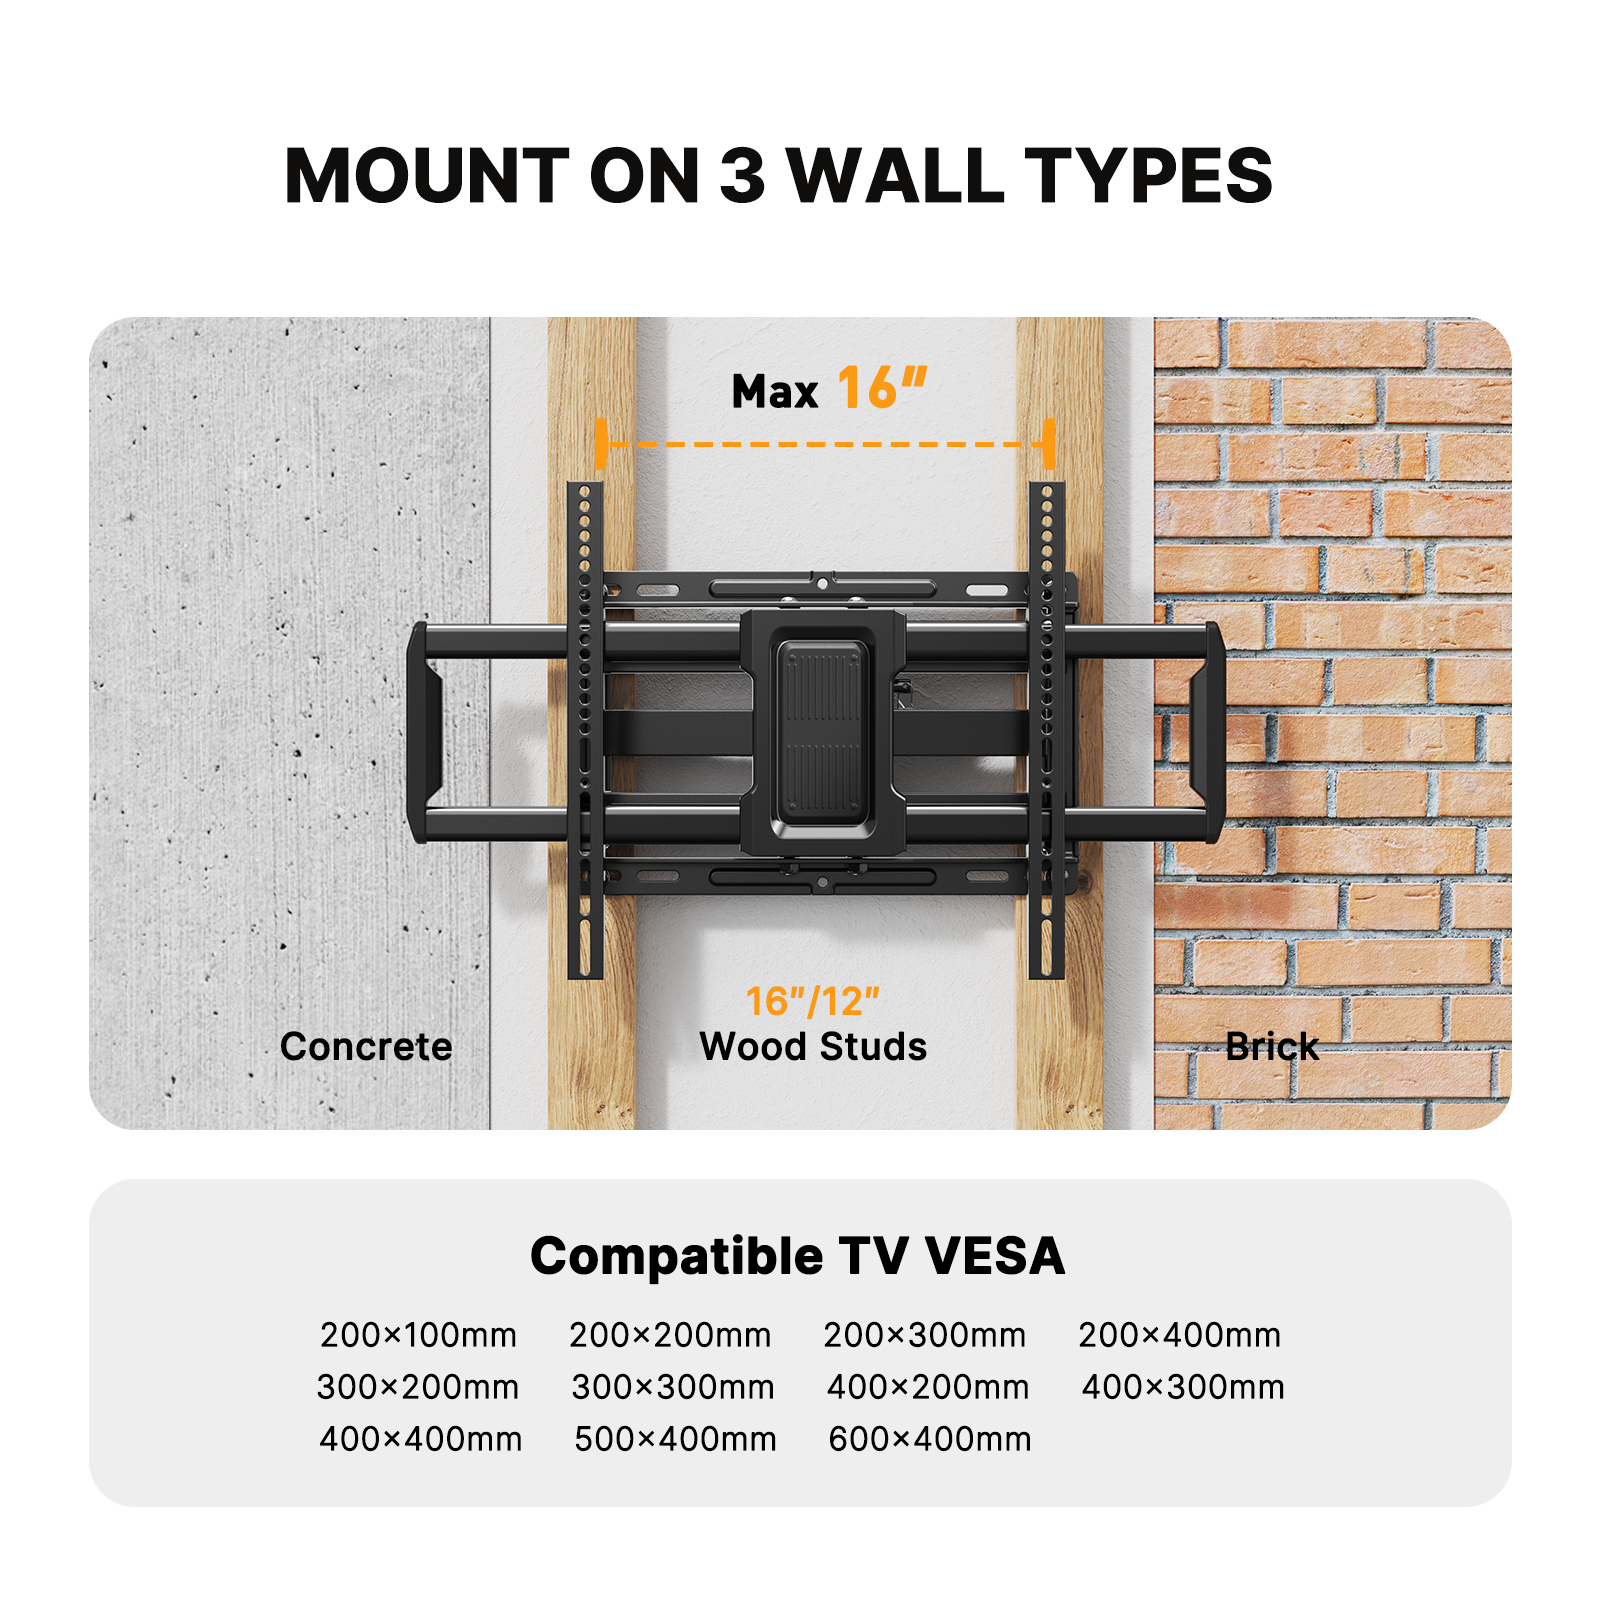 Full Motion TV Wall Mount for 40-82 inch TVs with Swivel, Tilting & Extension Max 600x400, up to 100 lbs - image 3 of 7